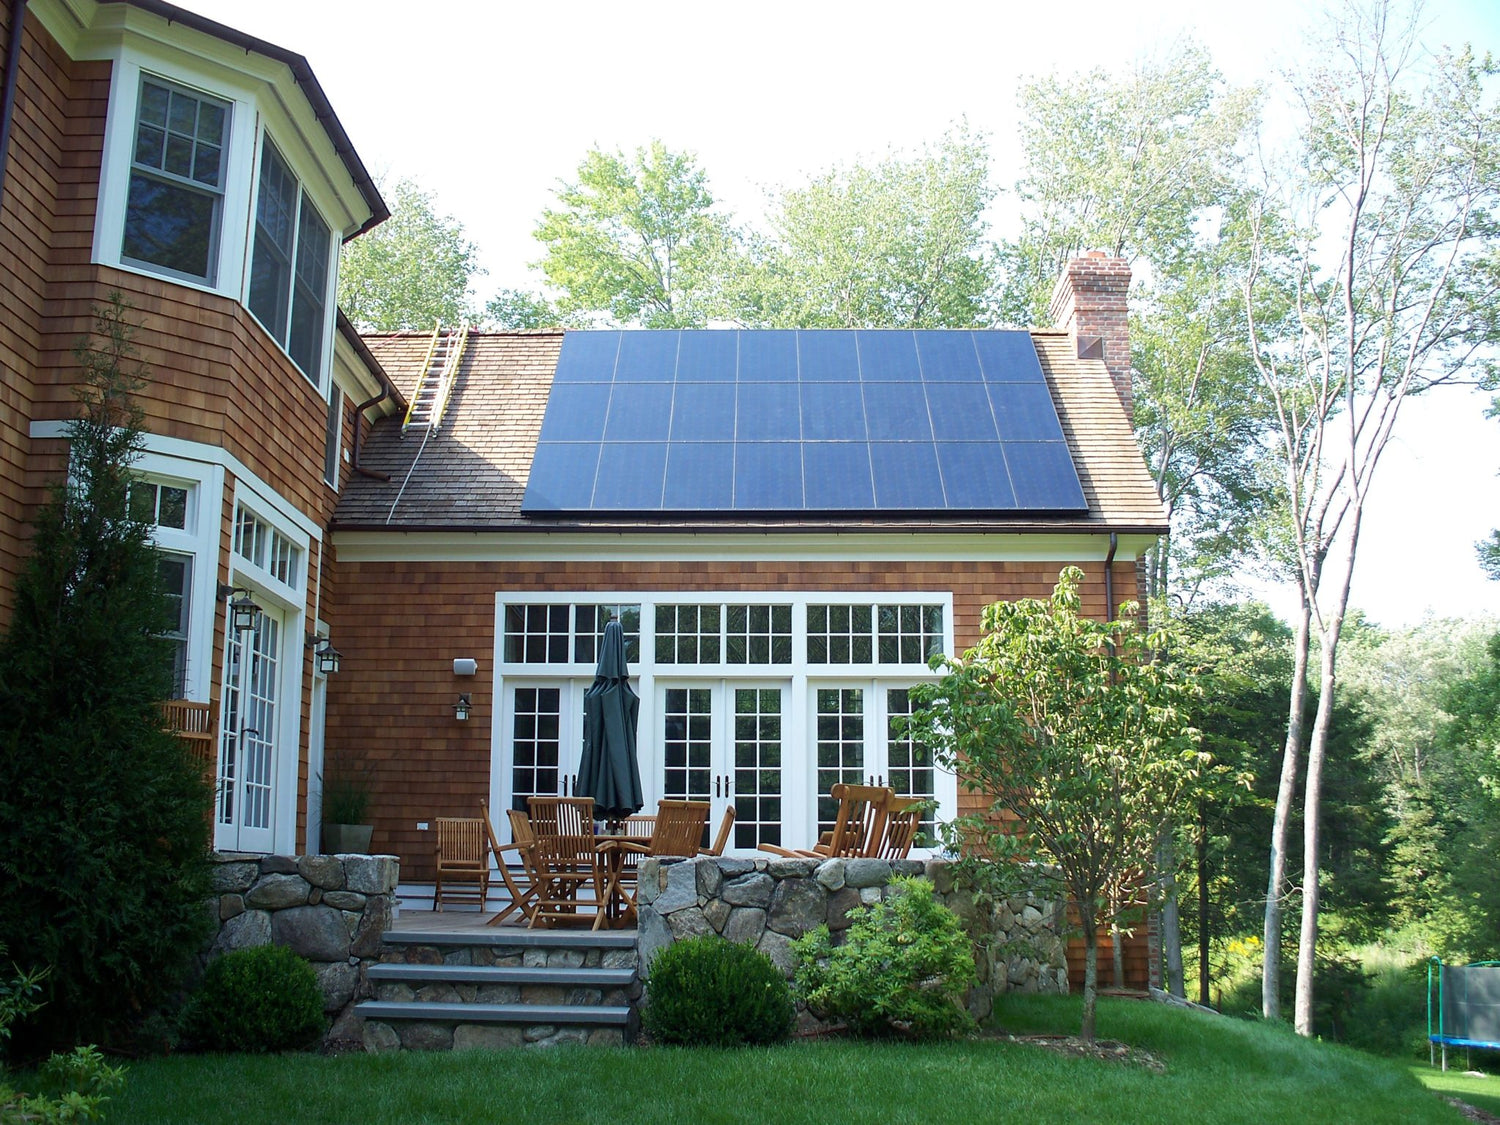 50 states of solar incentives: Connecticut